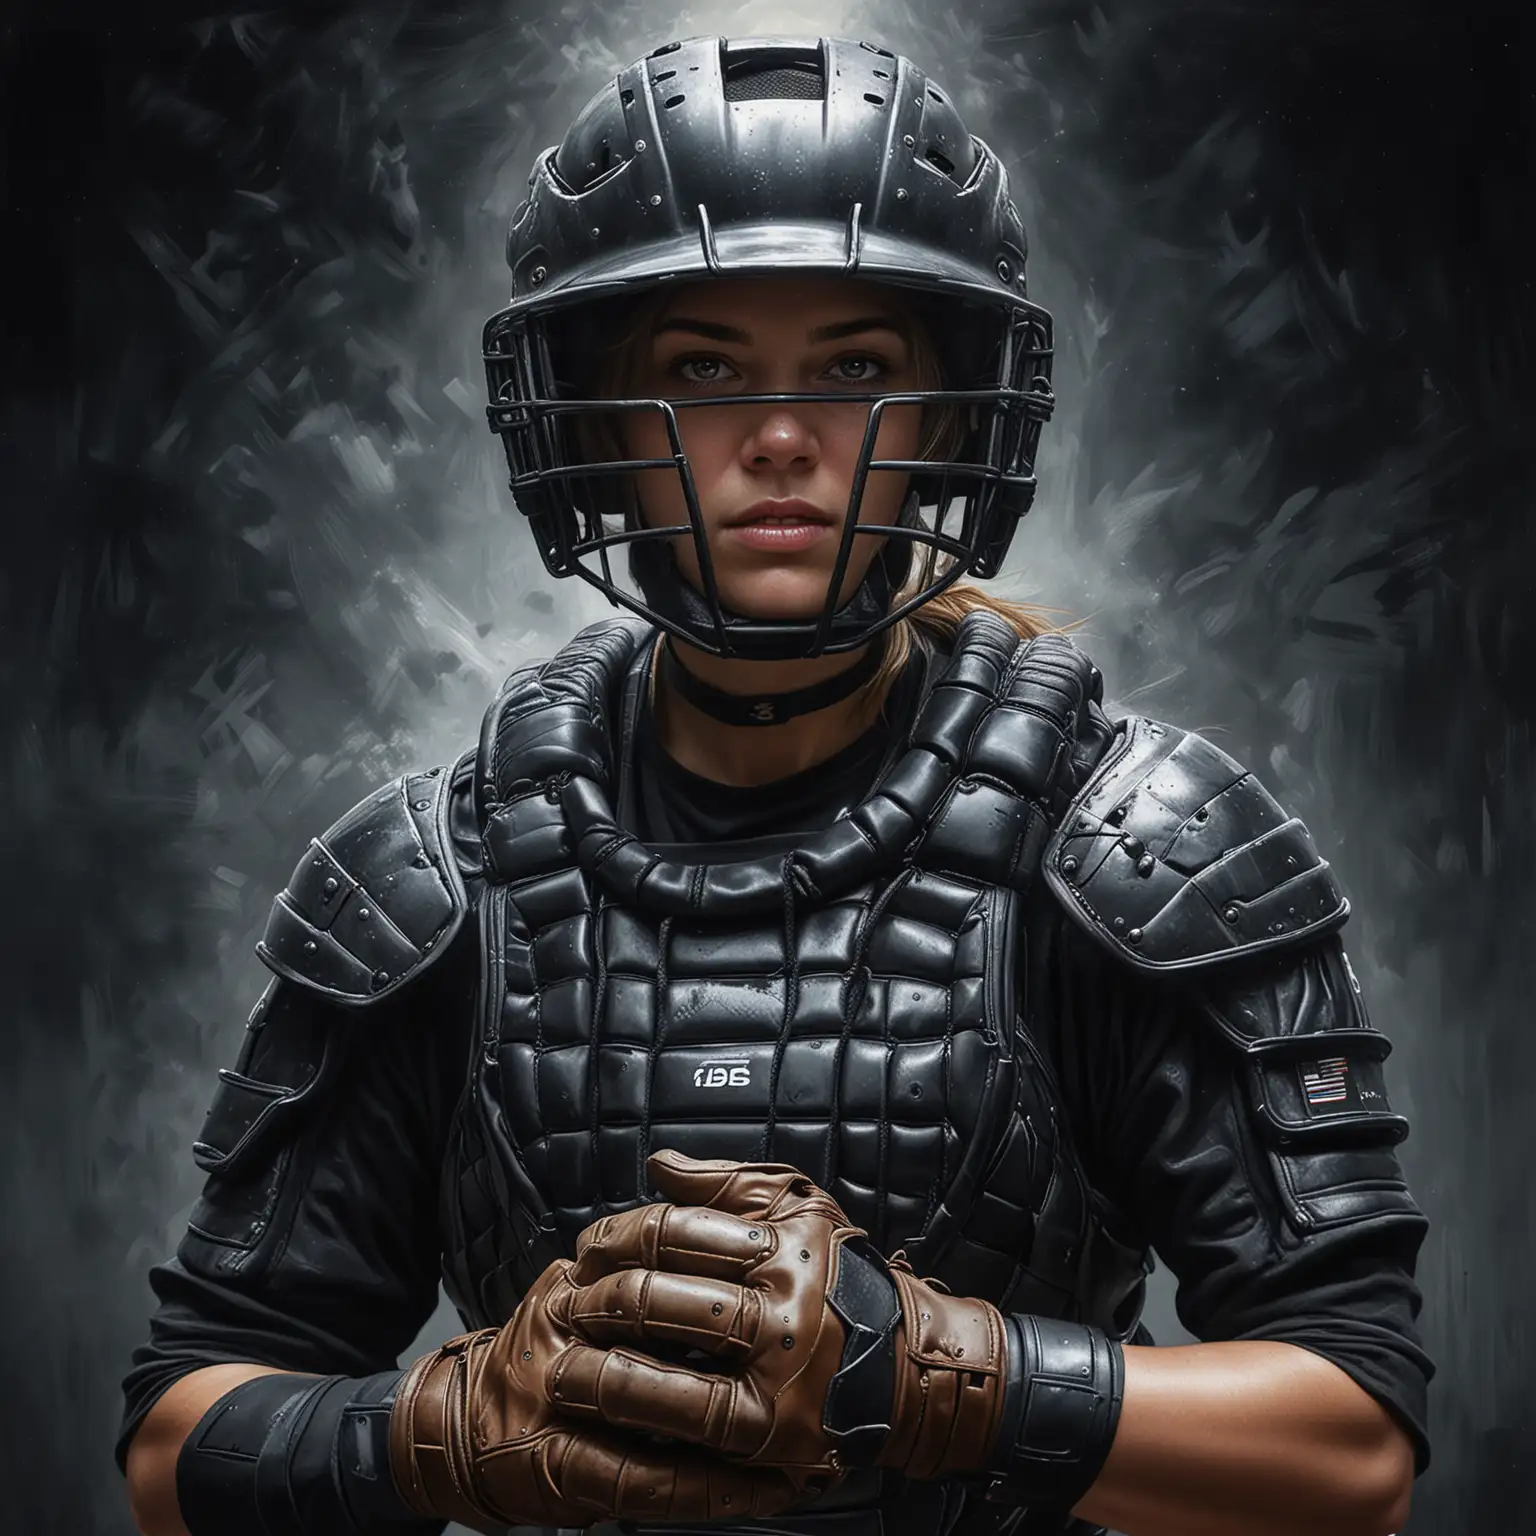 Futuristic Softball Catcher in HyperRealistic Oil Painting Style